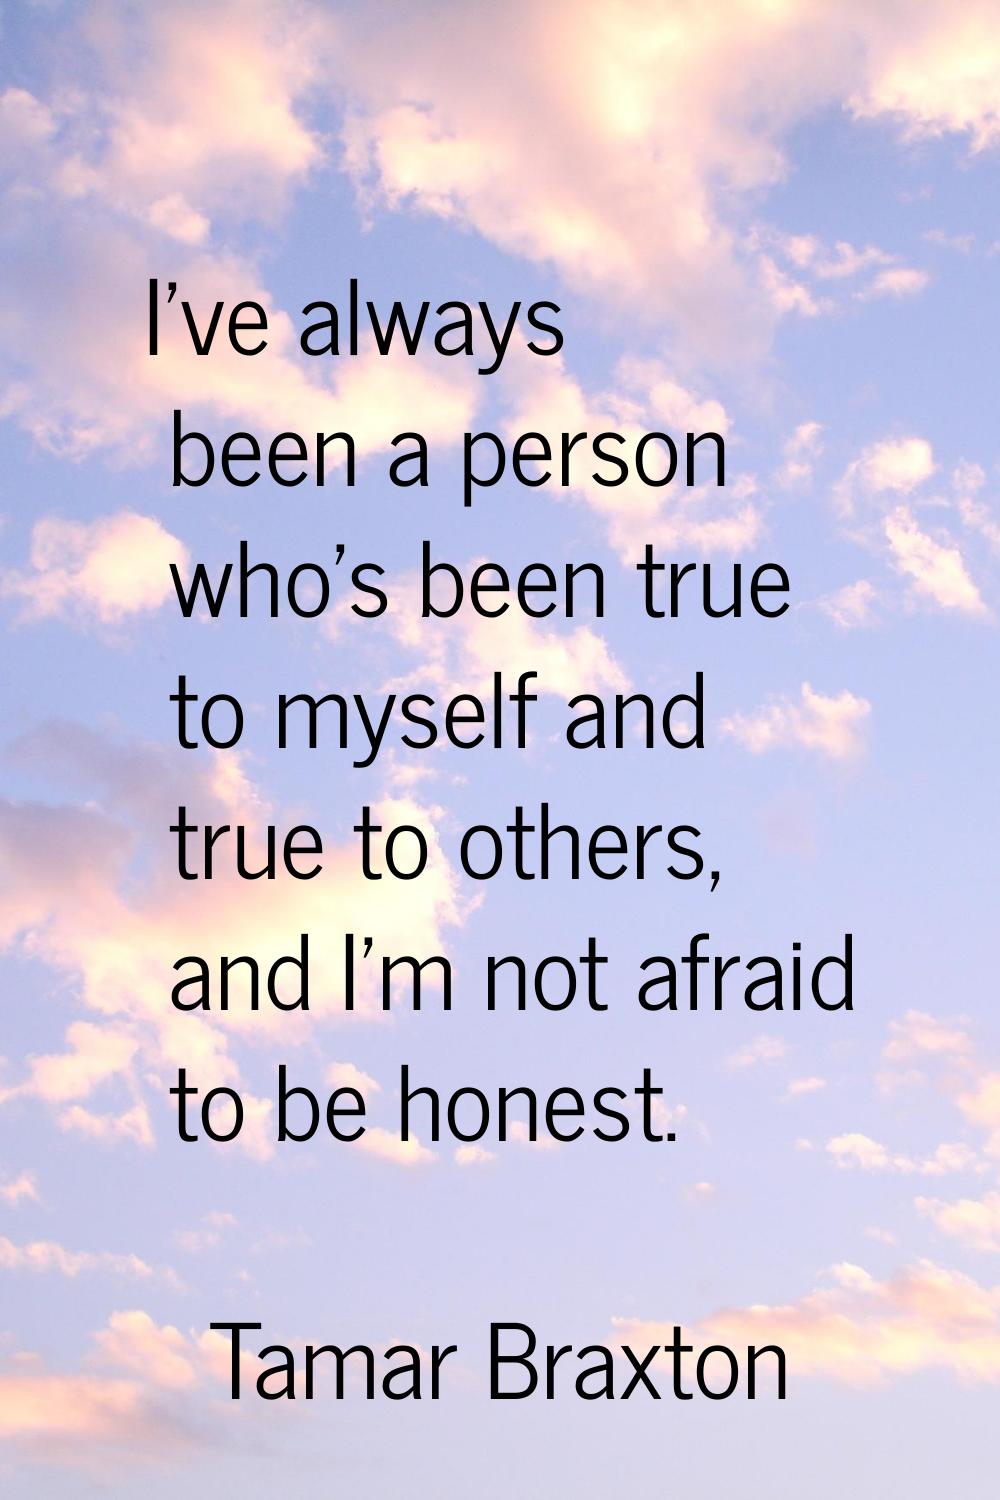 I've always been a person who's been true to myself and true to others, and I'm not afraid to be ho